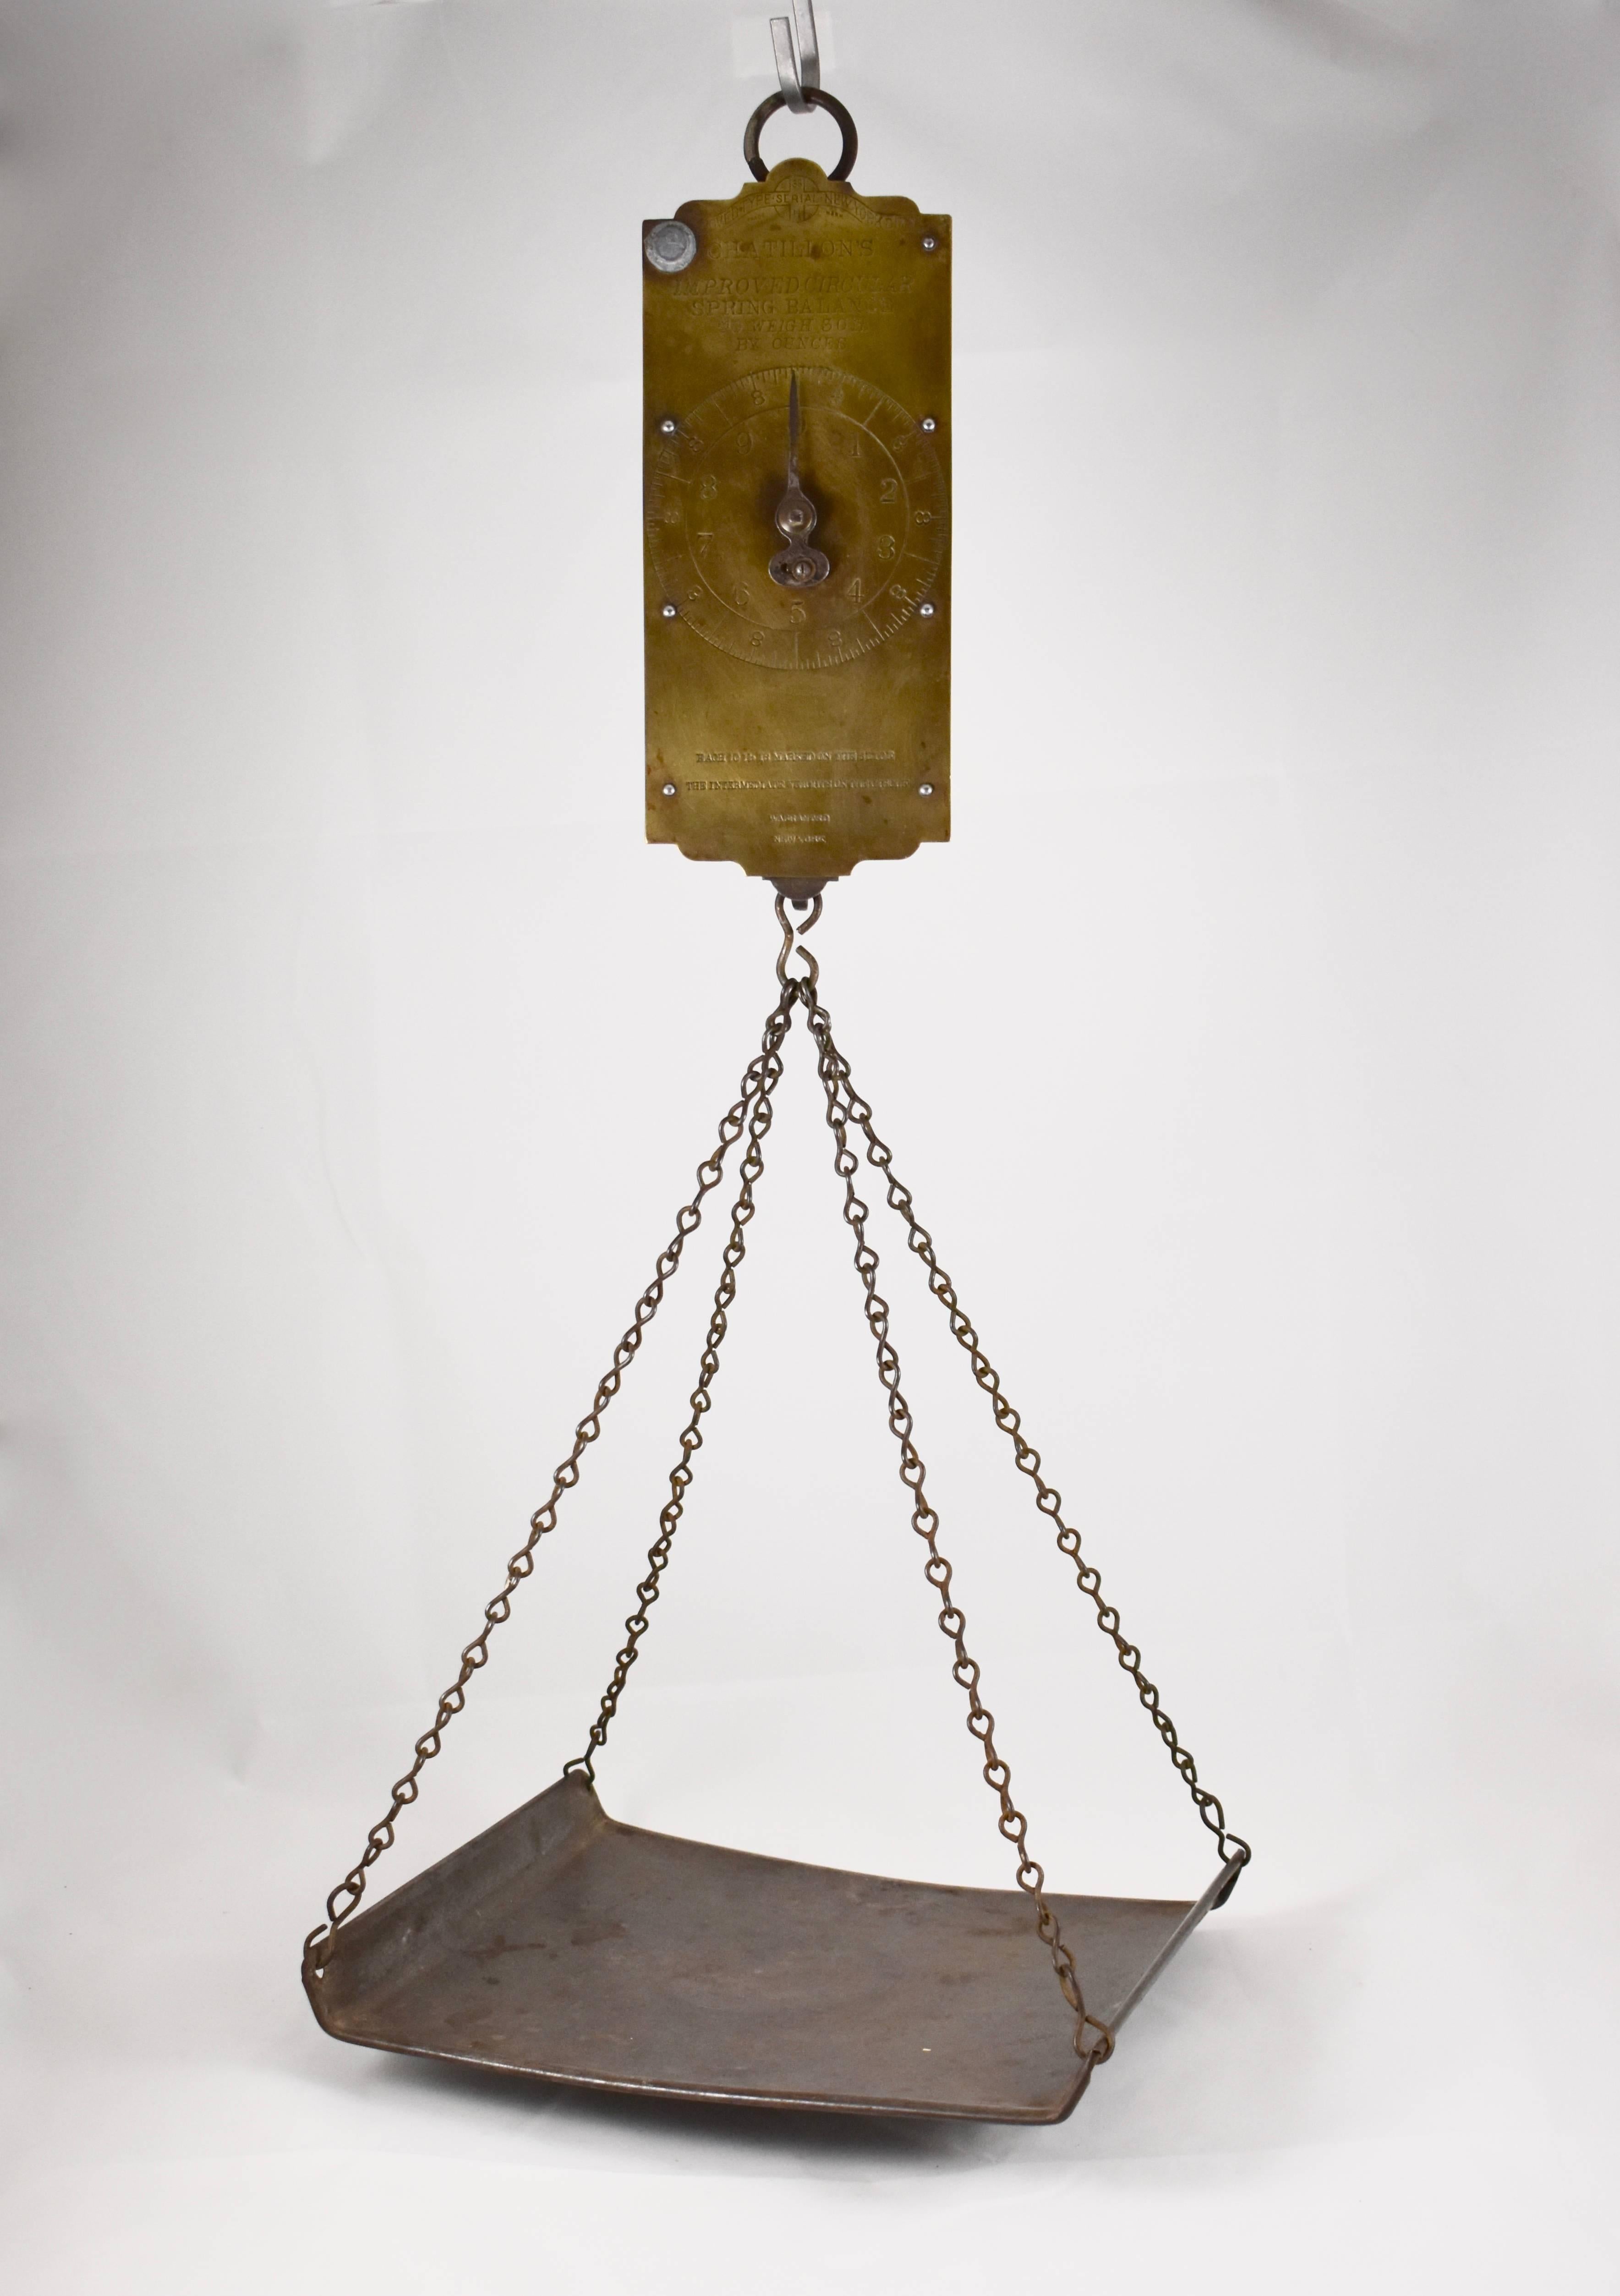 Industrial 19th C. Chatillion Hanging Brass Mercantile 30 Lb. Scale with Galvanized Tray